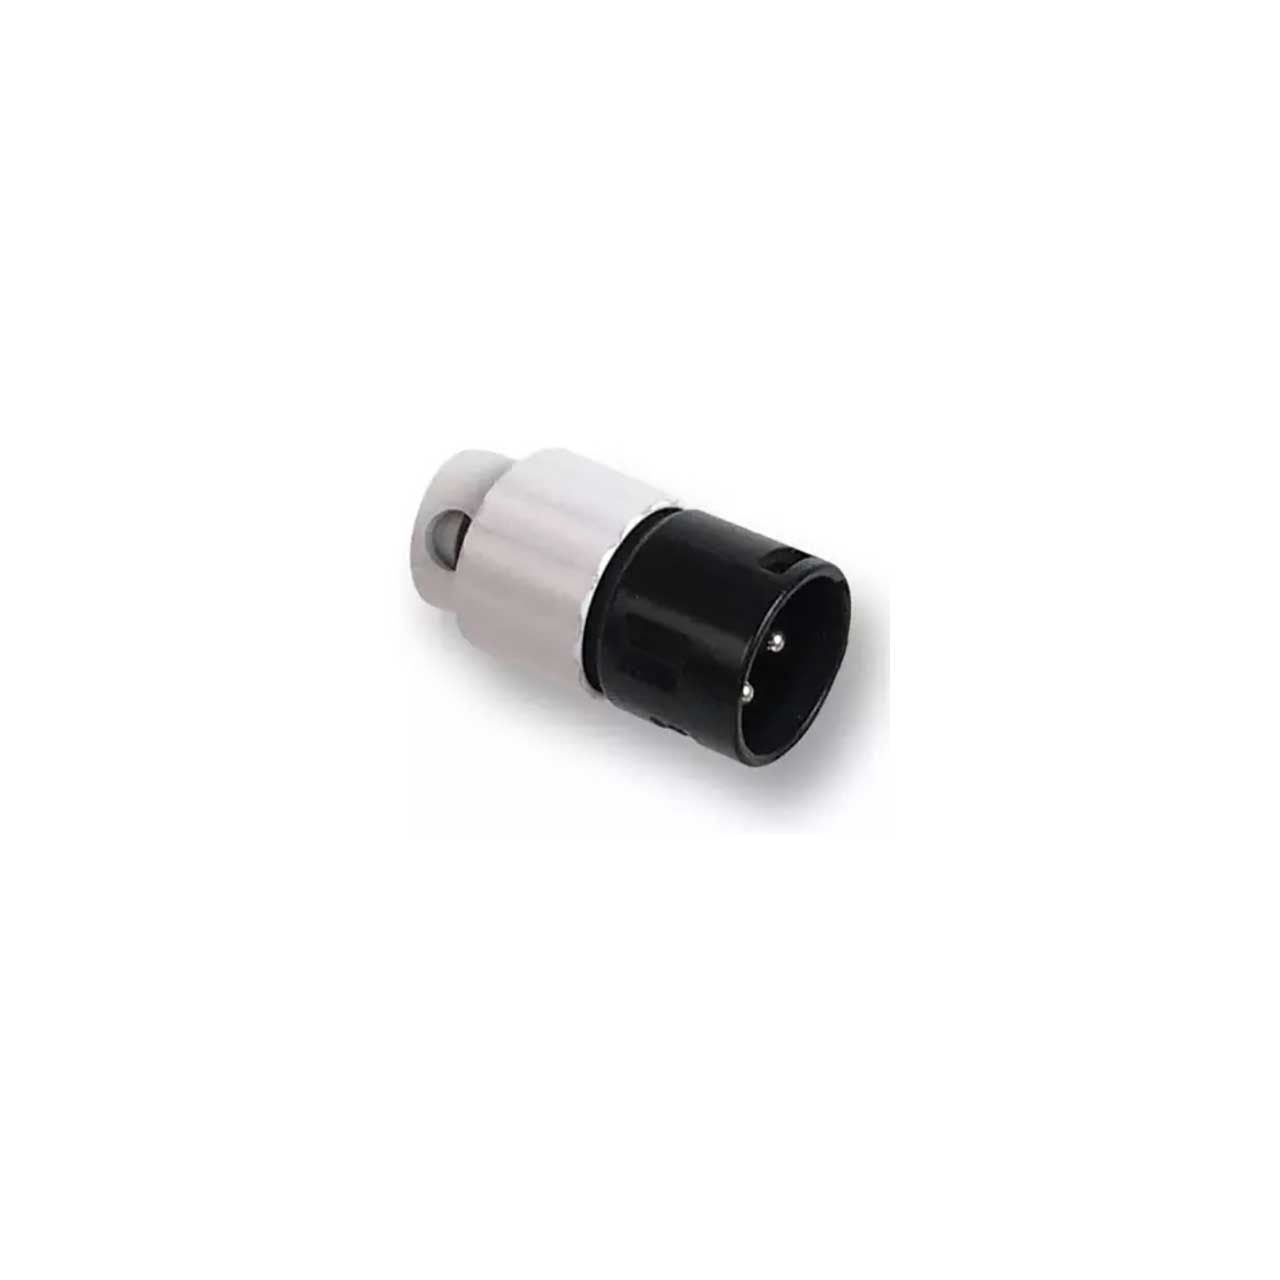 Switchcraft AAA3MBWWLP Low Profile 3 Position Male XLR Connector - Black with White Back